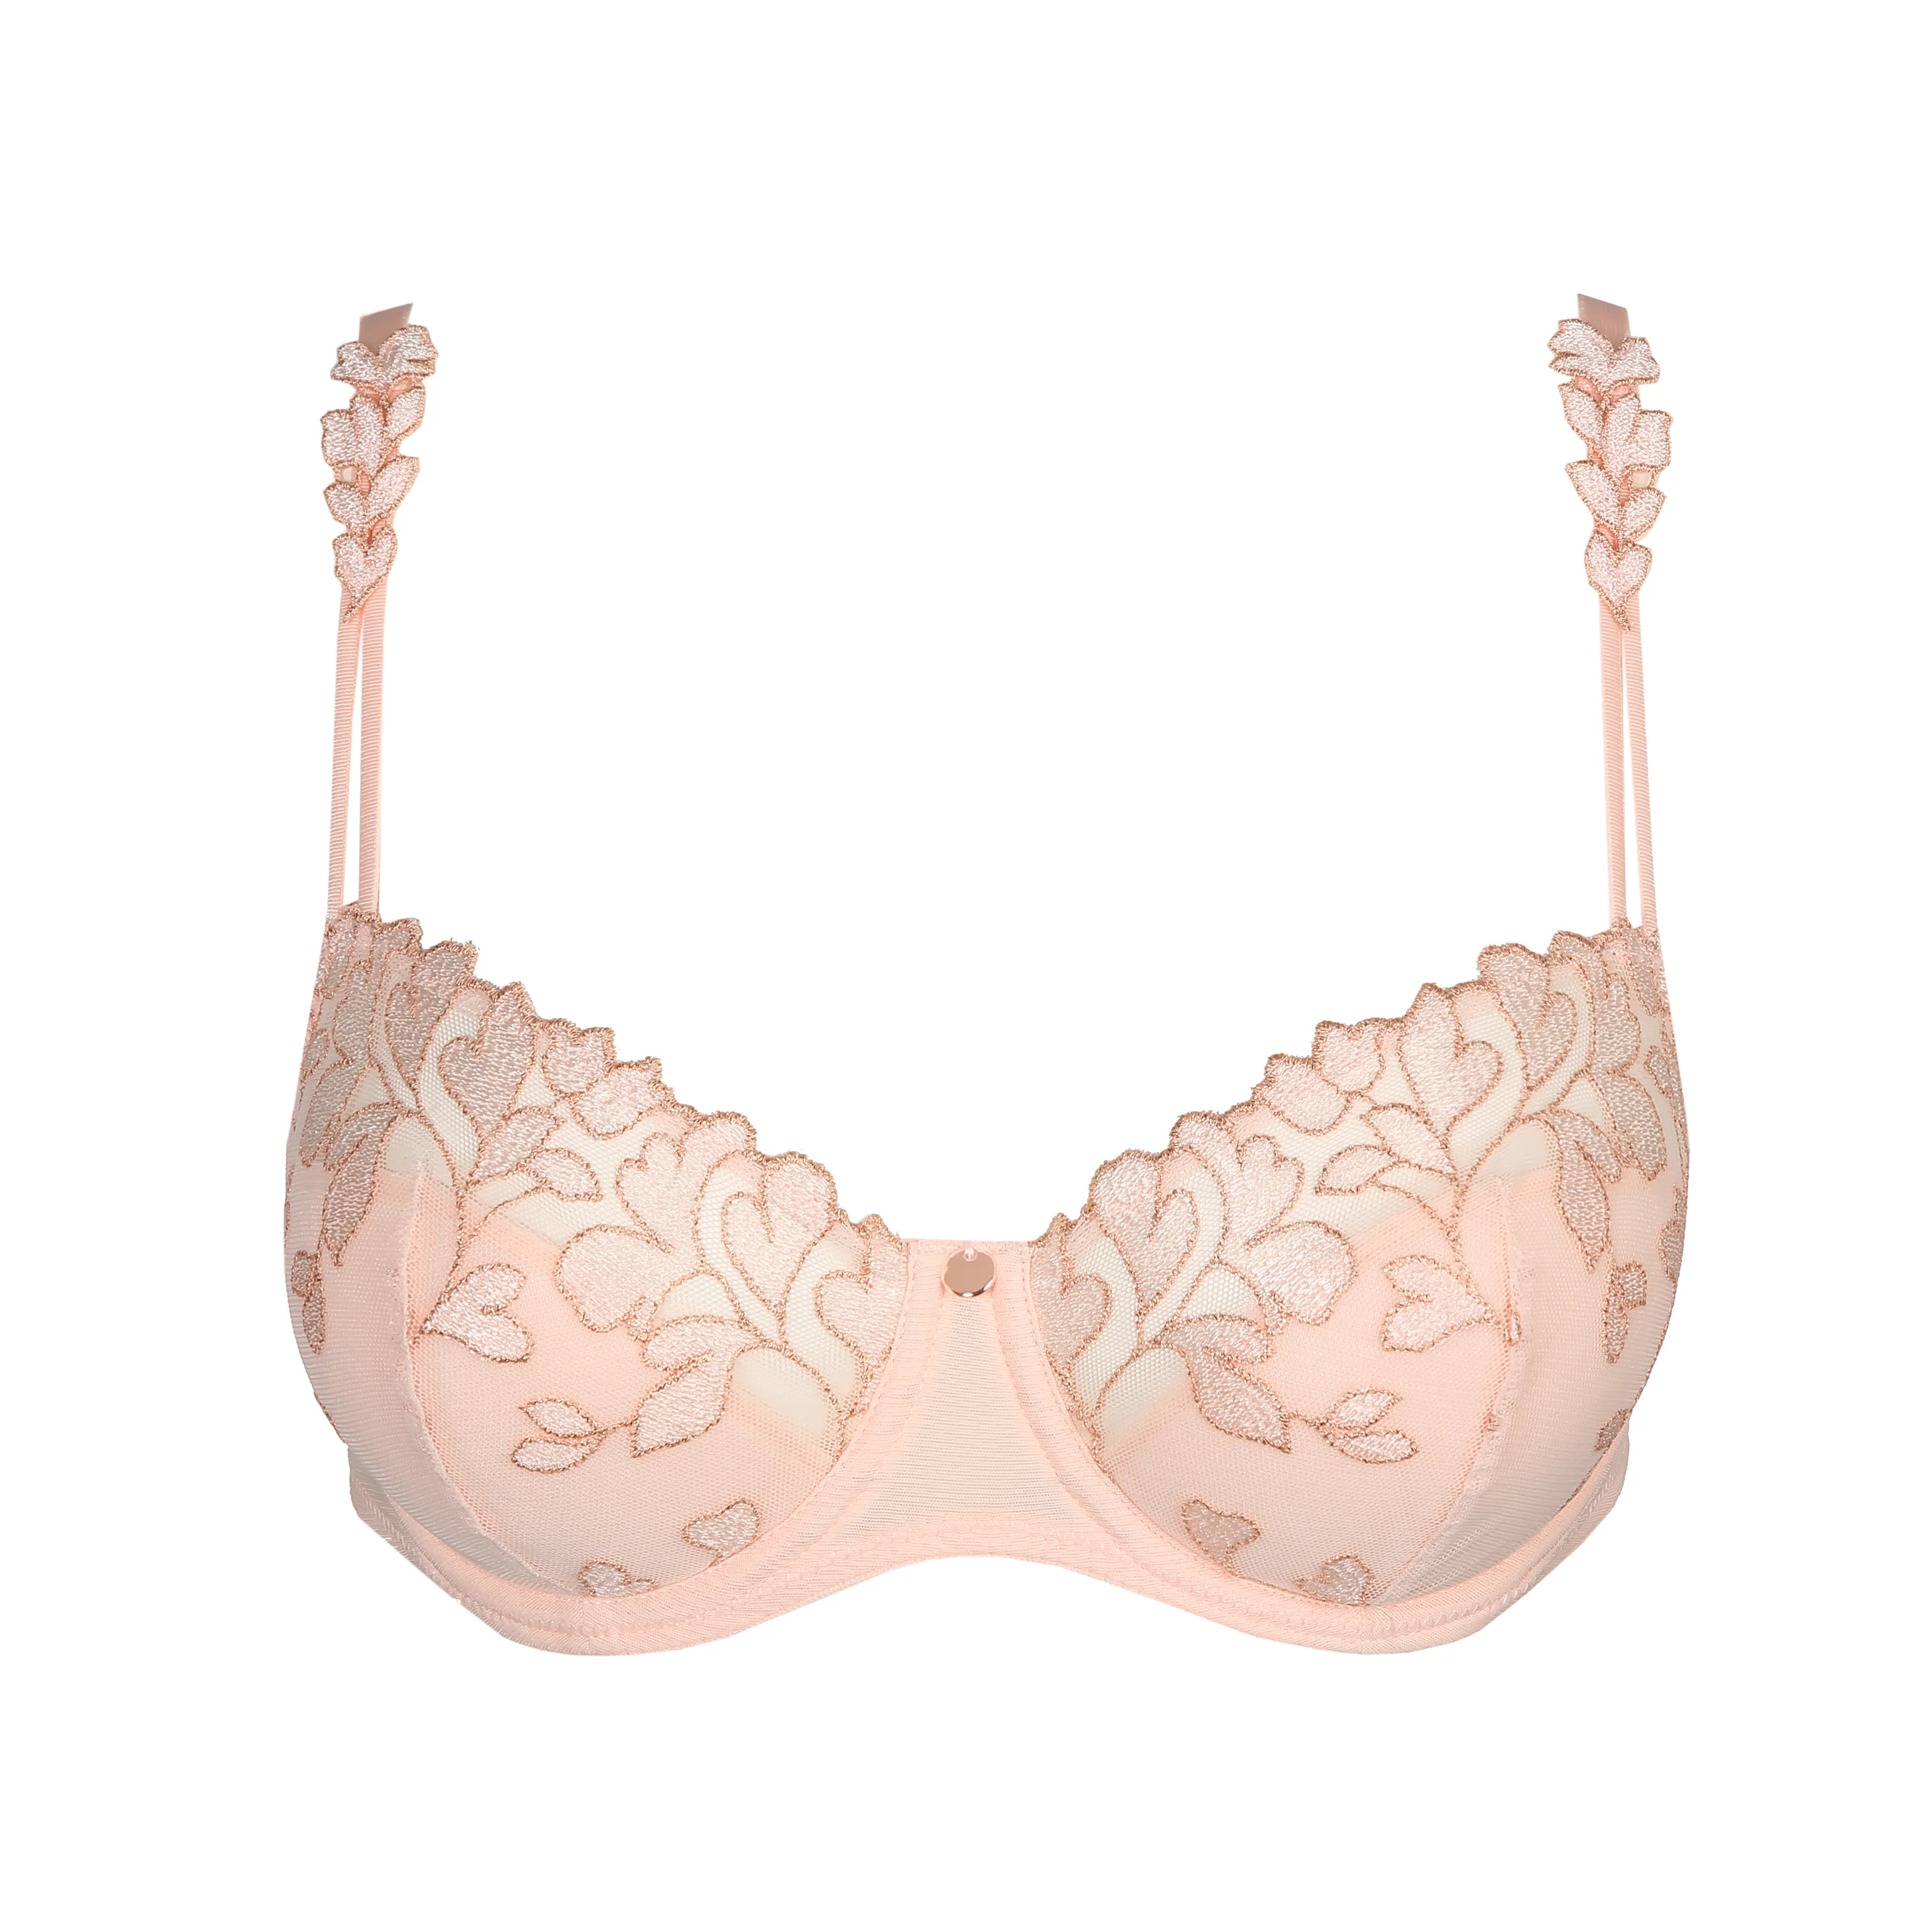 Jockey Candy Pink Firm Support Bra in Solan - Dealers